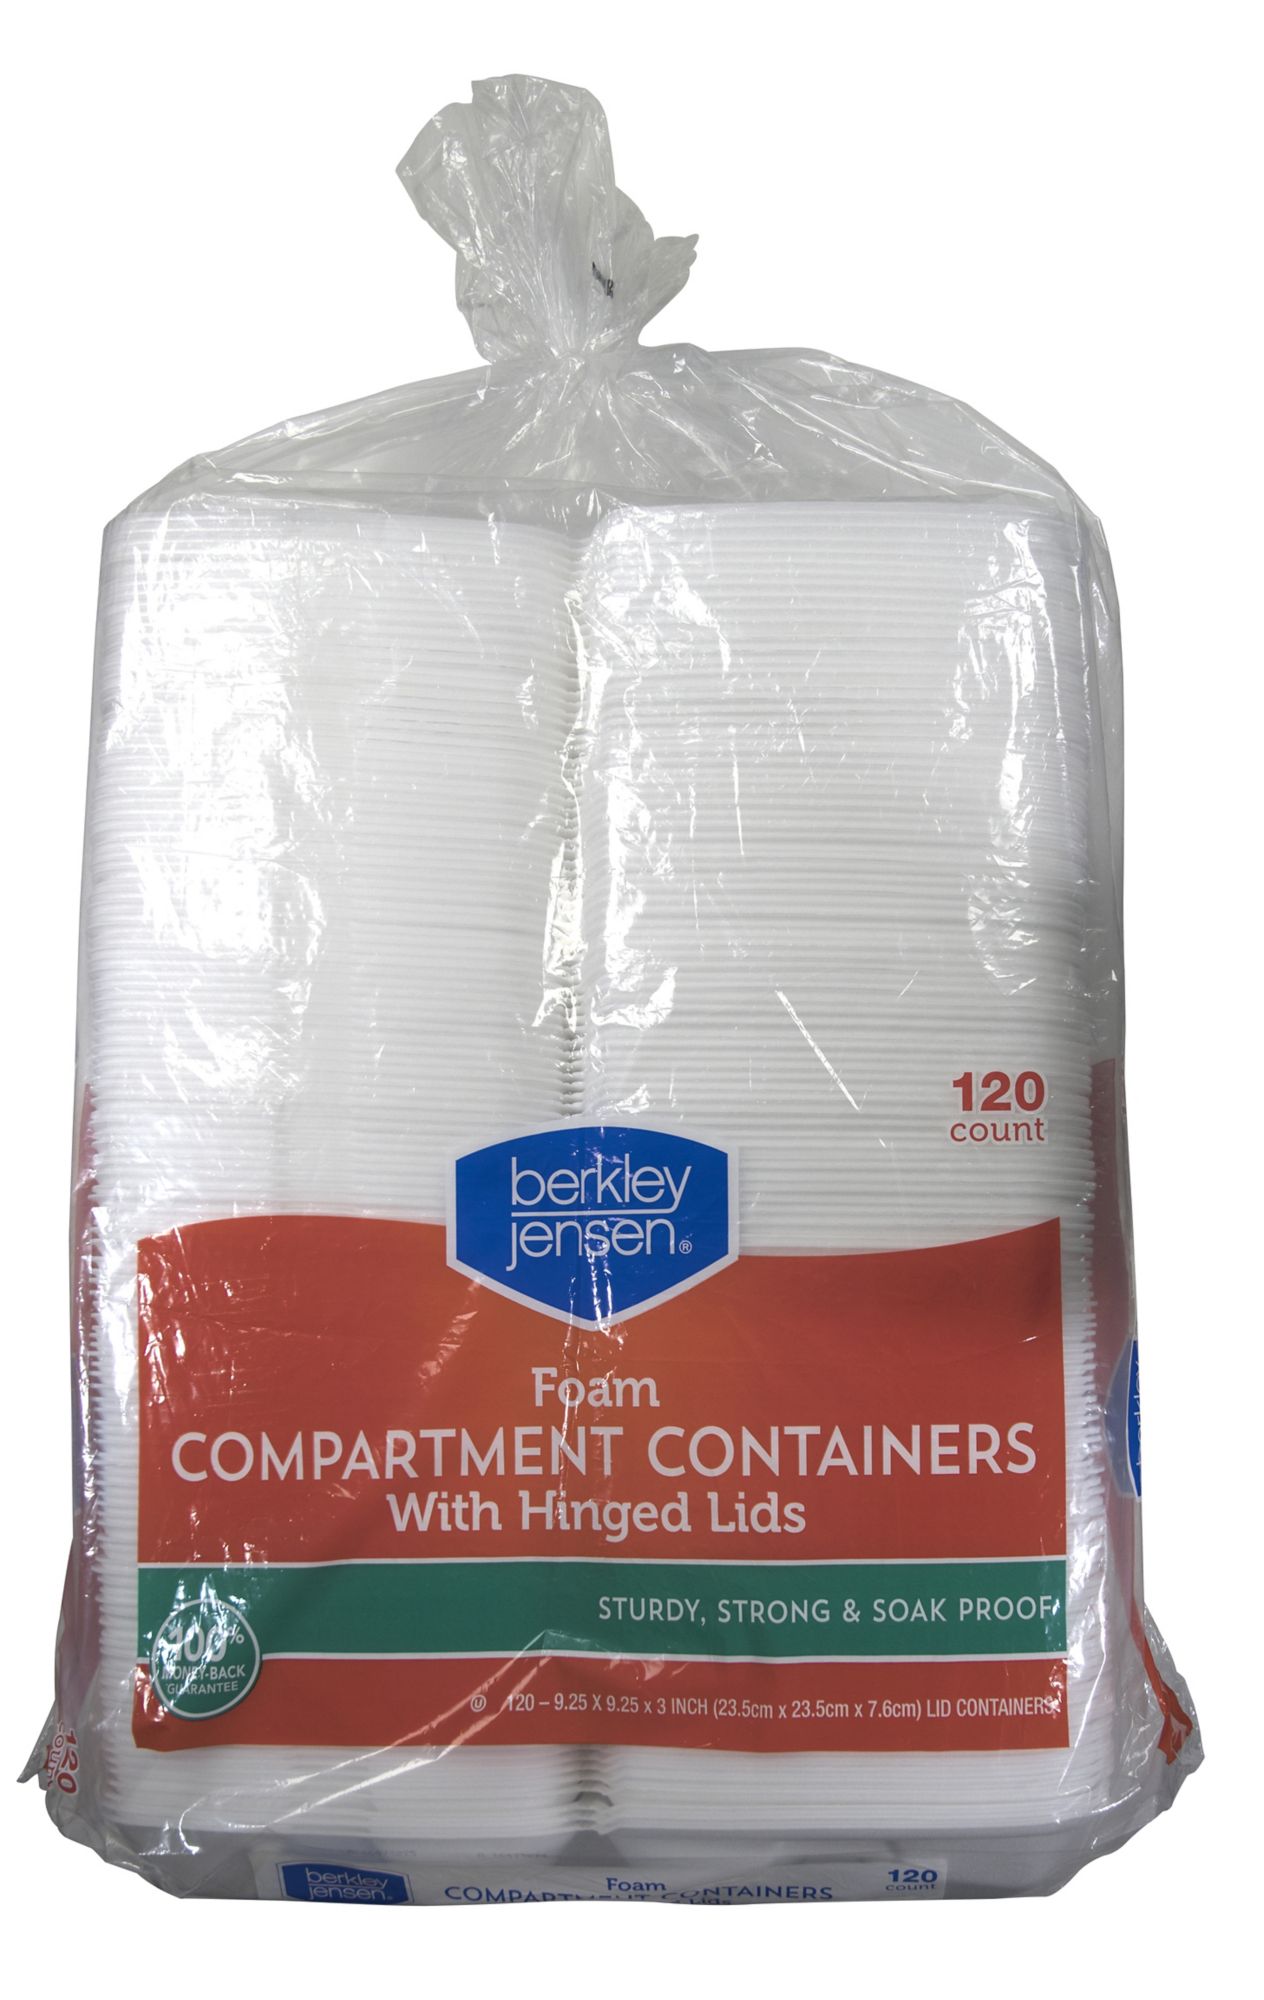 Berkley Jensen Hinged Foam Compartment Containers, 120 ct.